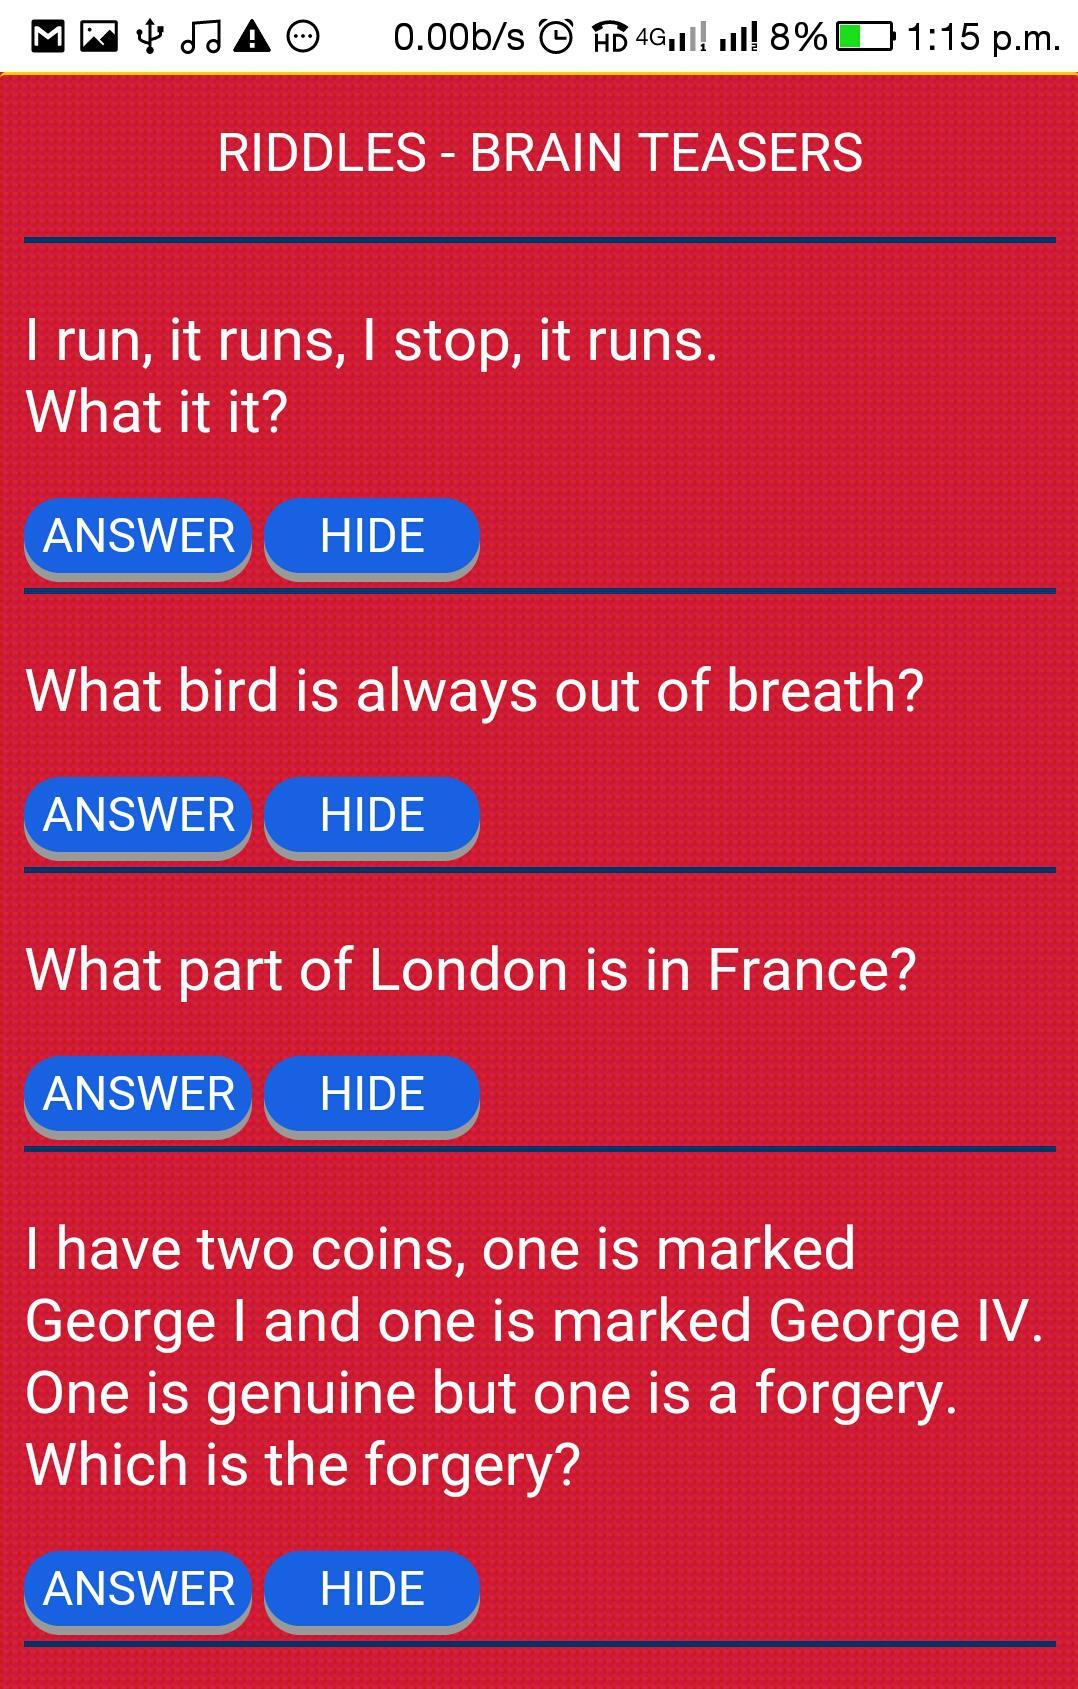 Игра pets riddles brain teasers. English Riddles. Picture Riddles for Brains.